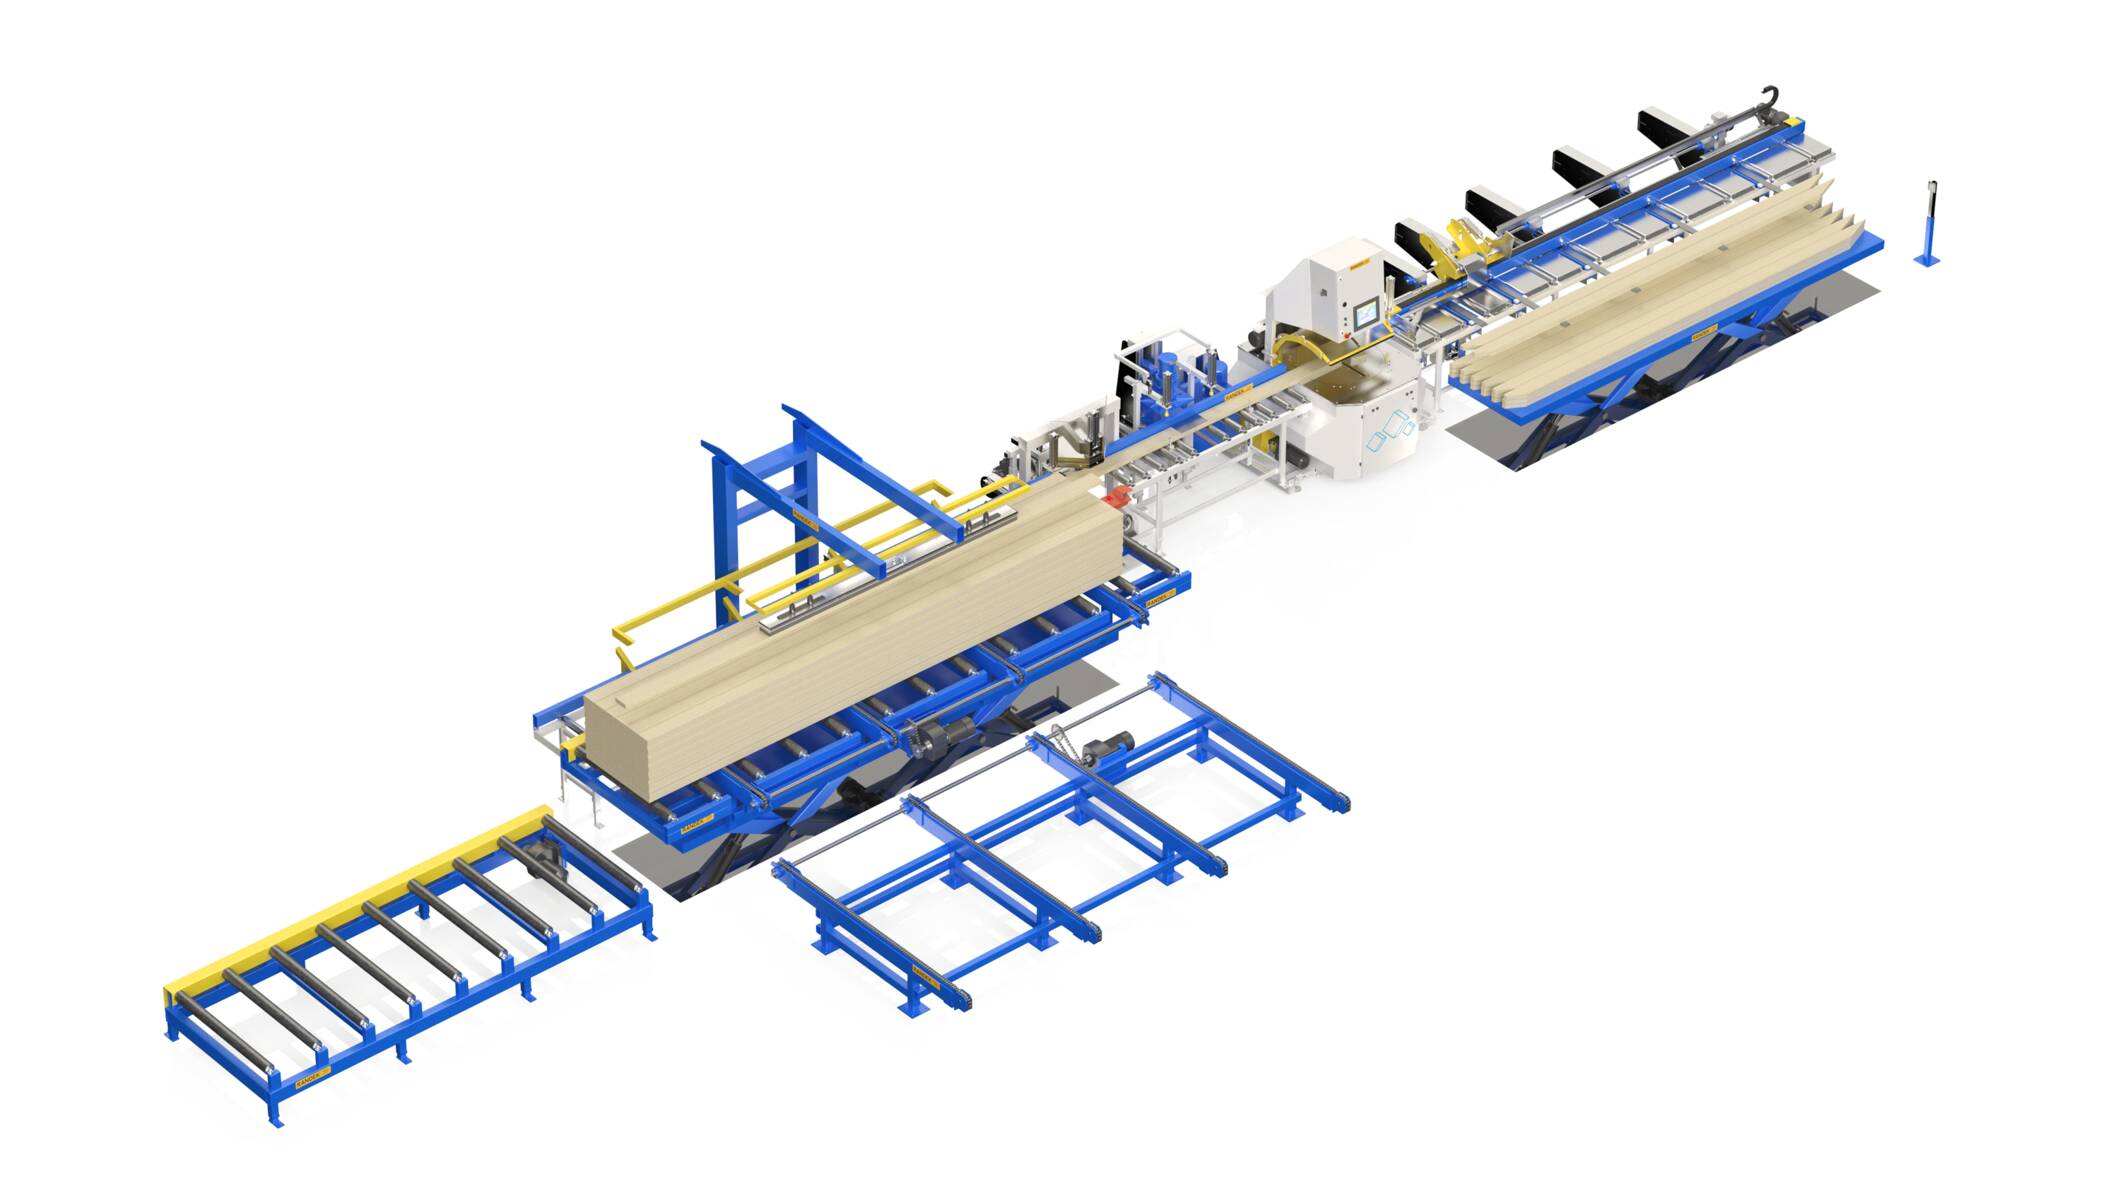 Systems for timber construction - Systems for effective prefabrication house manufacturing - cut saw sp720